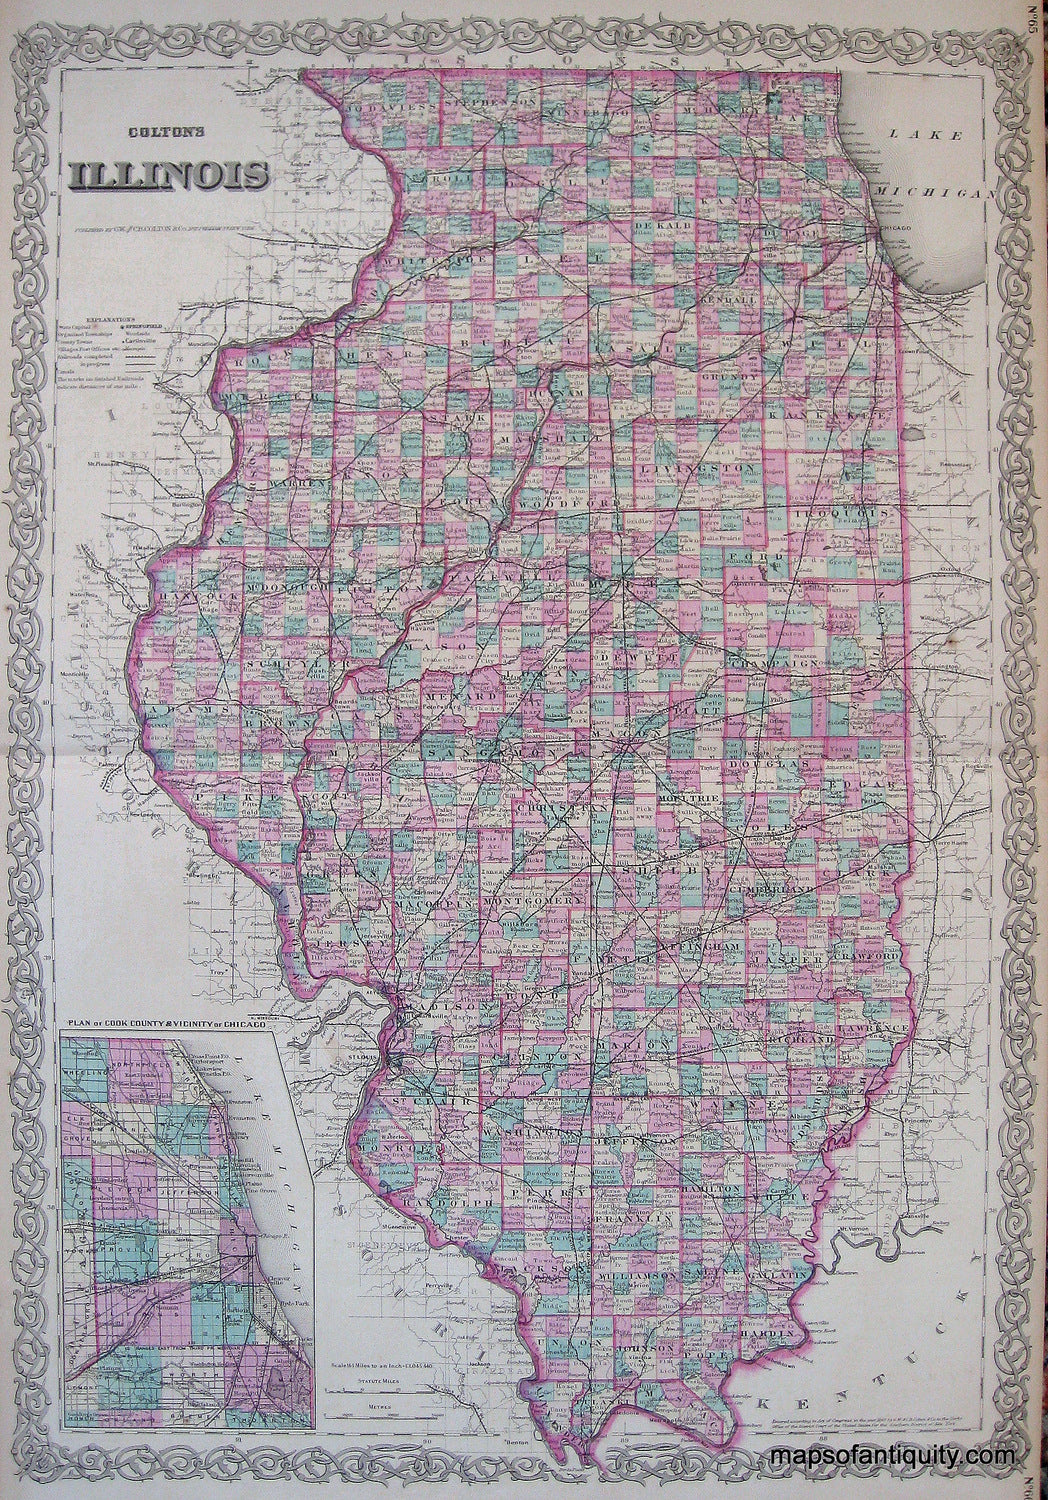 Antique-Hand-Colored-Map-Colton's-Illinois-United-States-Illinois-1871-Colton-Maps-Of-Antiquity